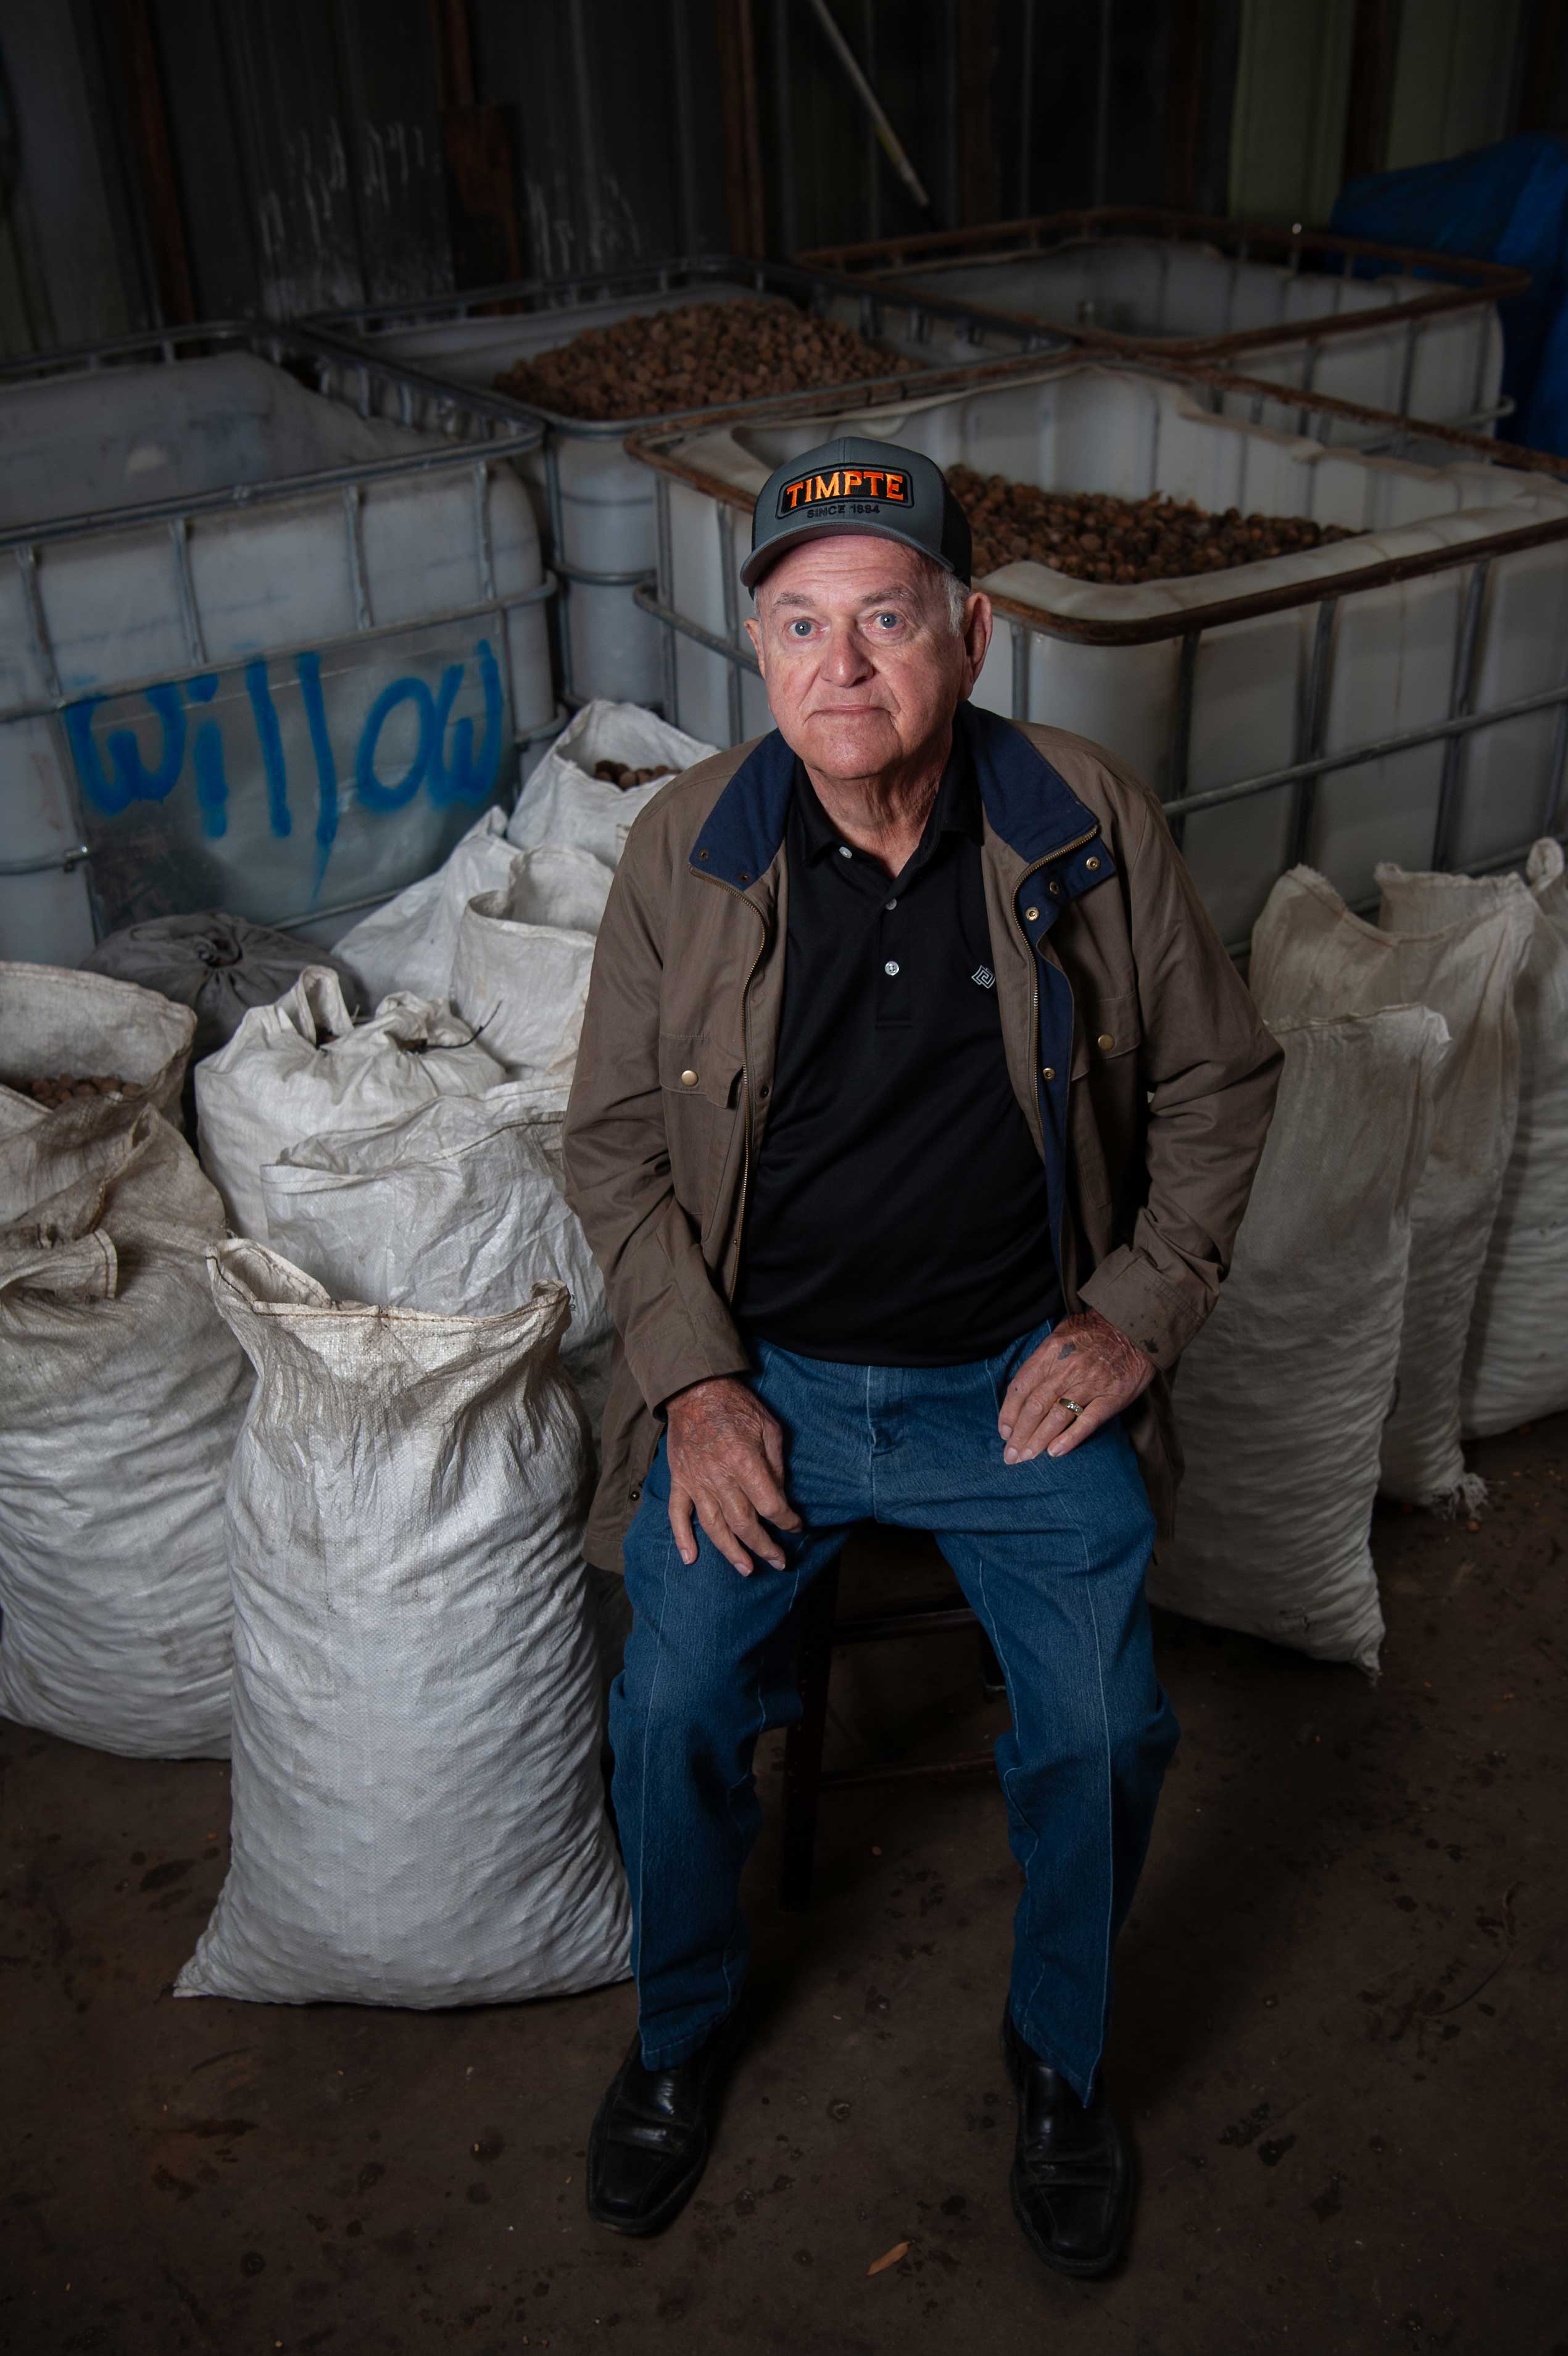 Sidney Miller sits on a stack of sacks containing acorns at his seed supply company.